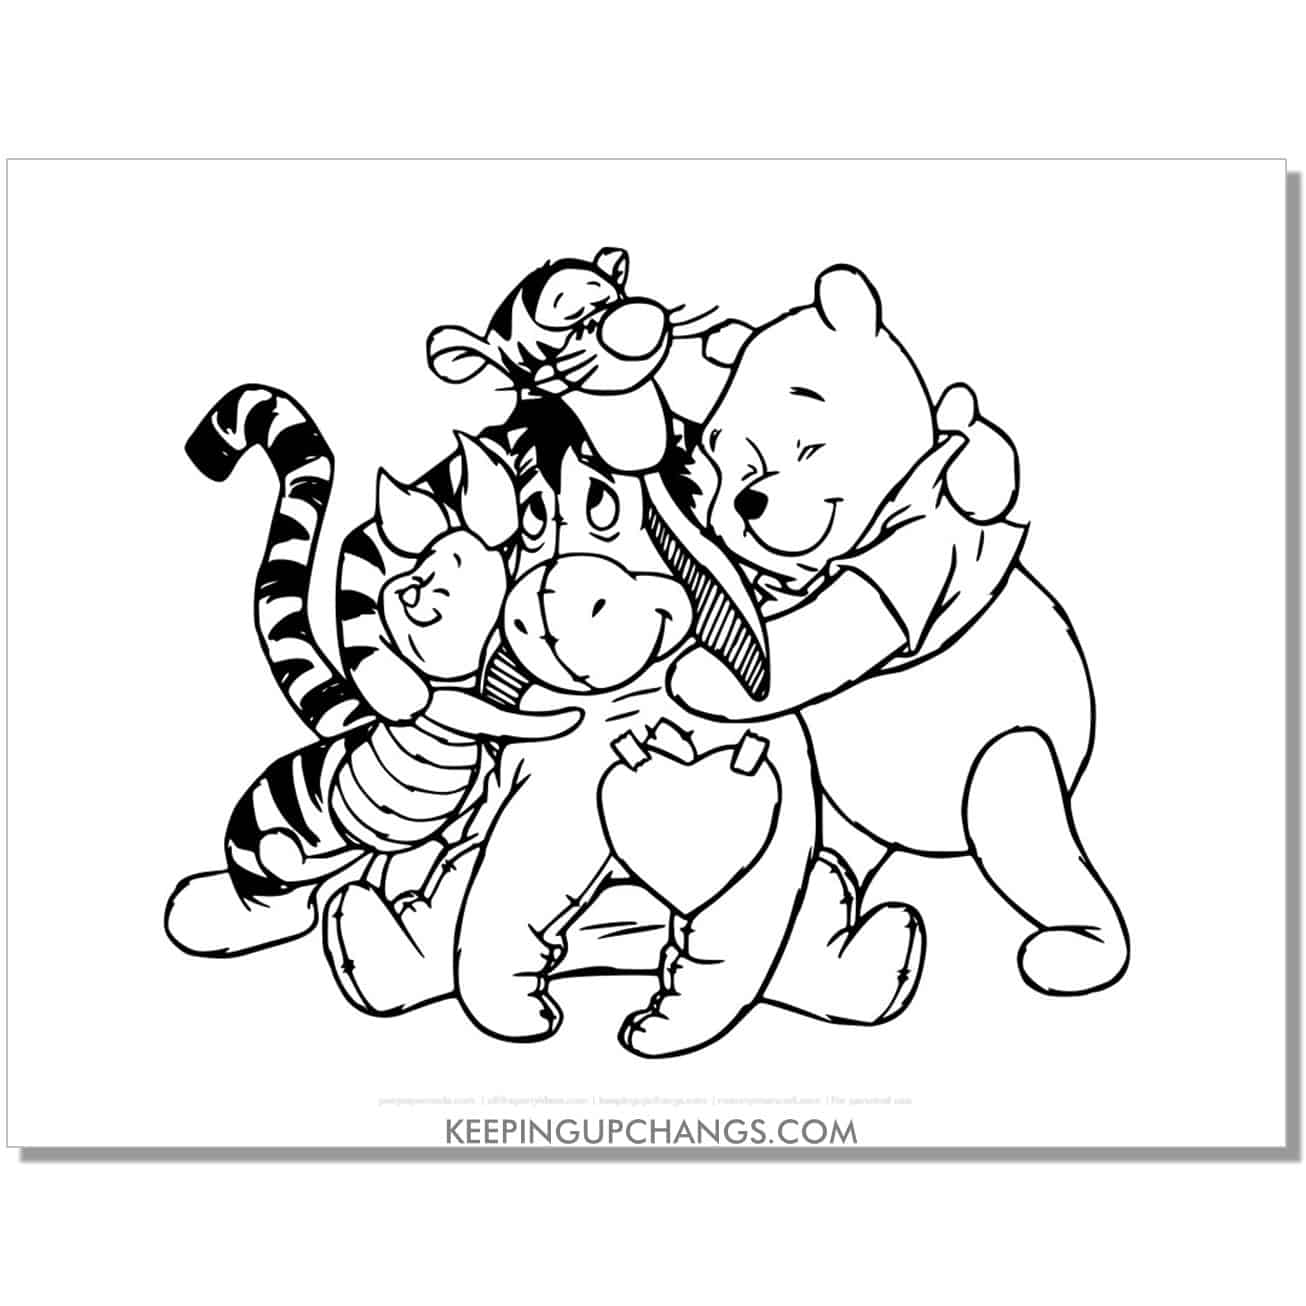 winnie the pooh friends in a group hug coloring page, sheet.